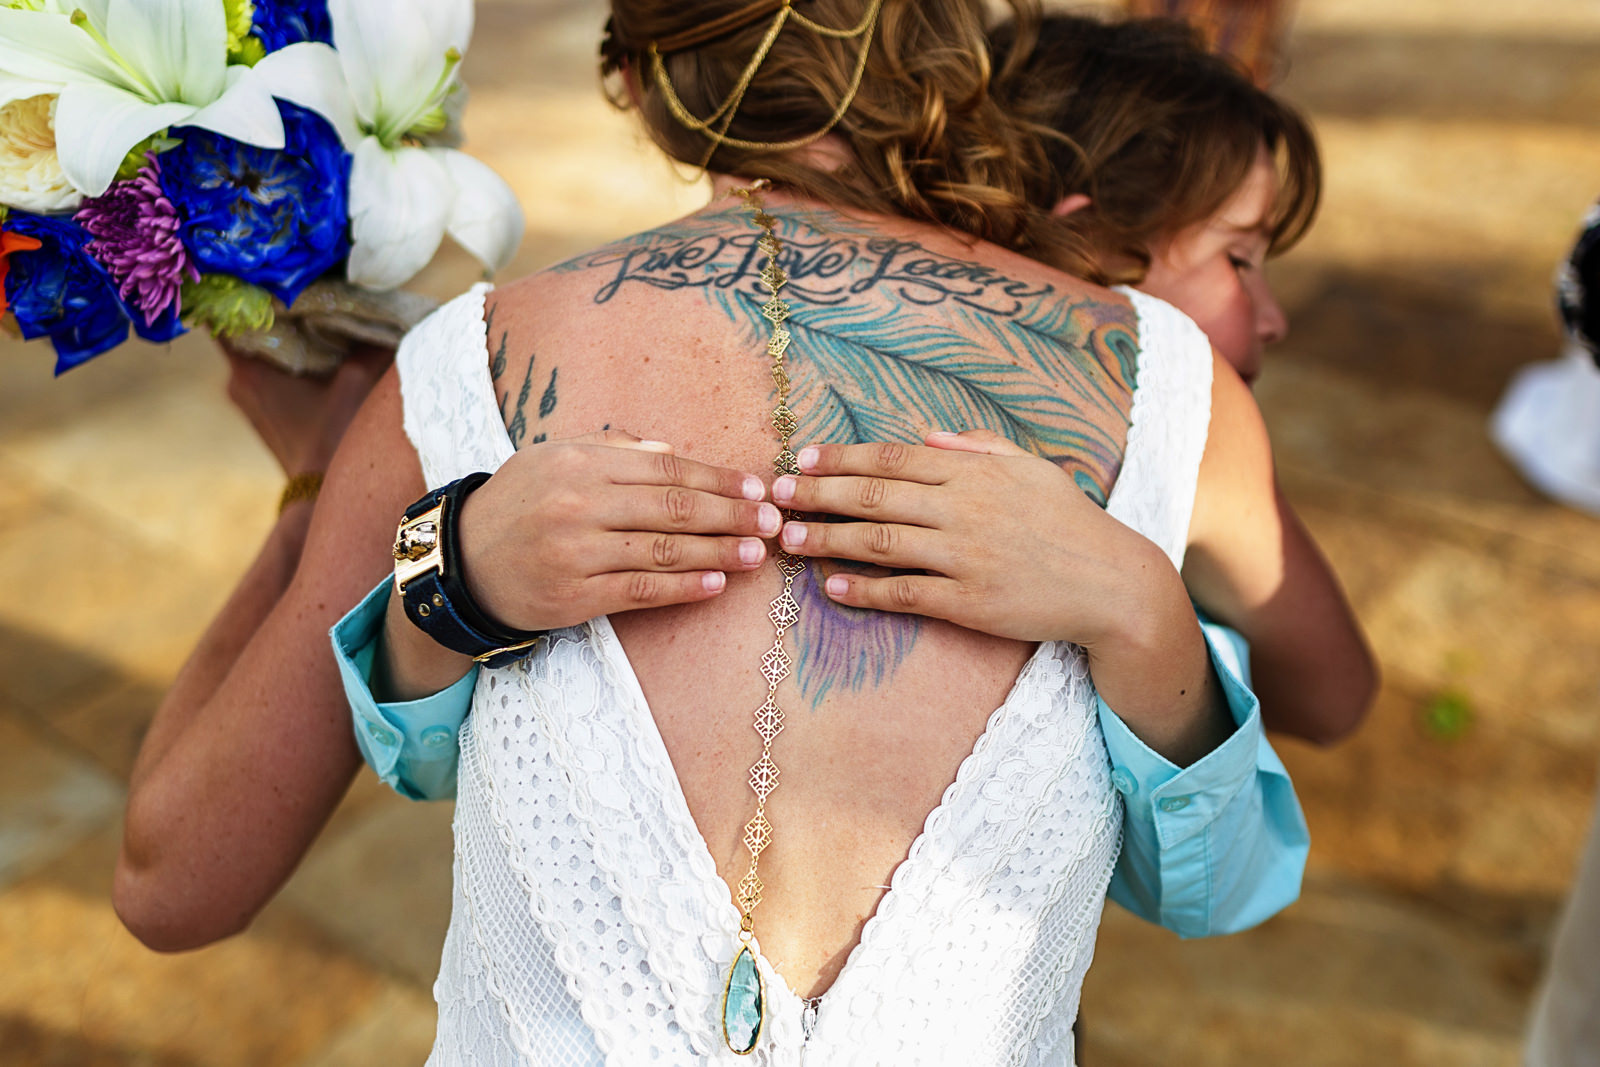 A kid hugs the bride and her back tatto can be seen